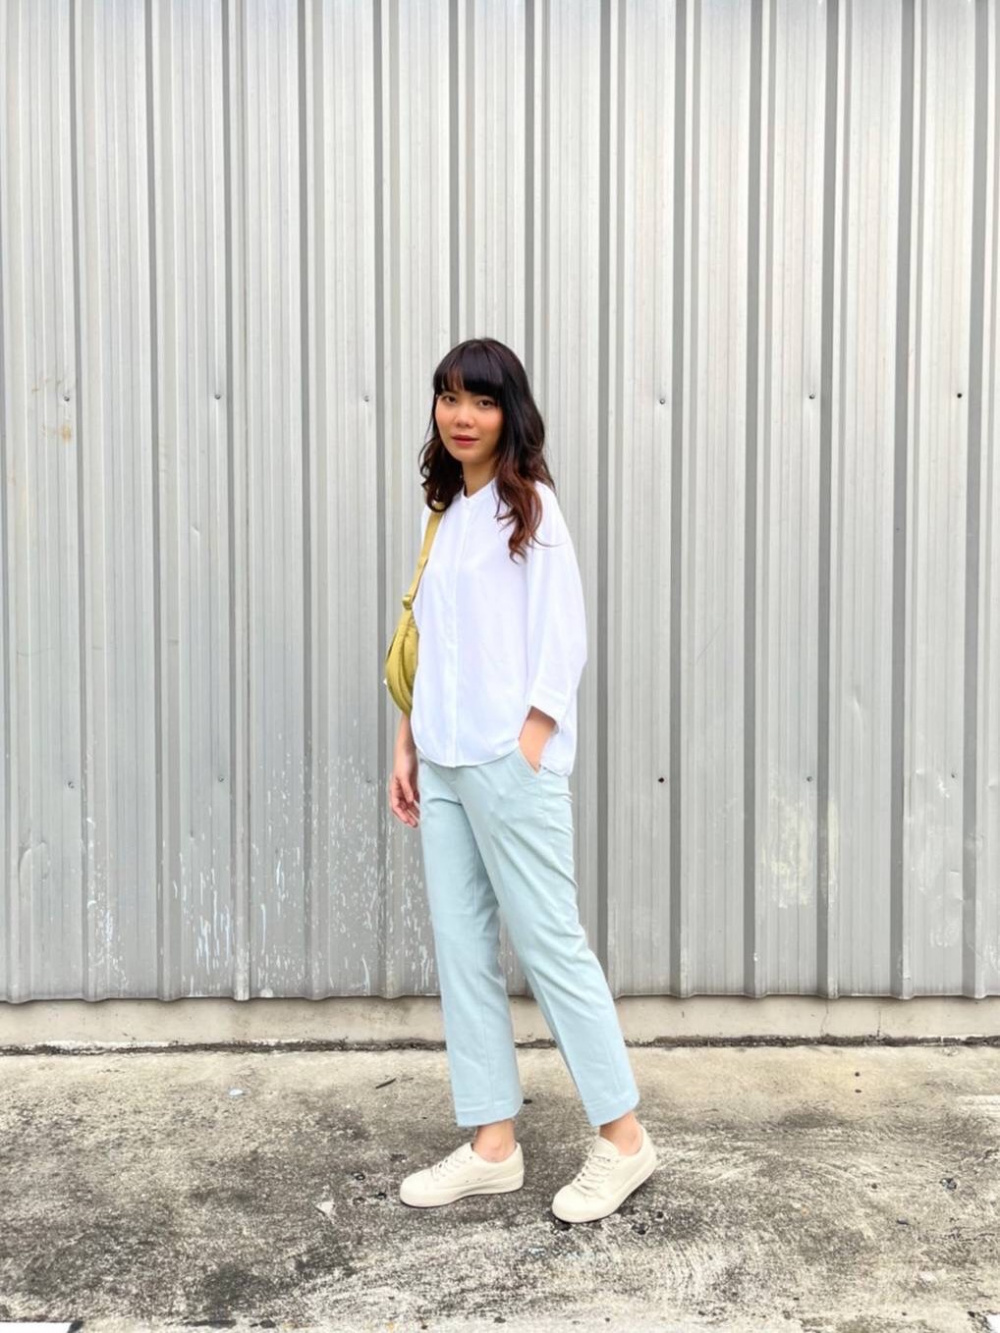 Shop looks for「Rayon Long Sleeve Blouse、Smart Ankle Pants (2-Way